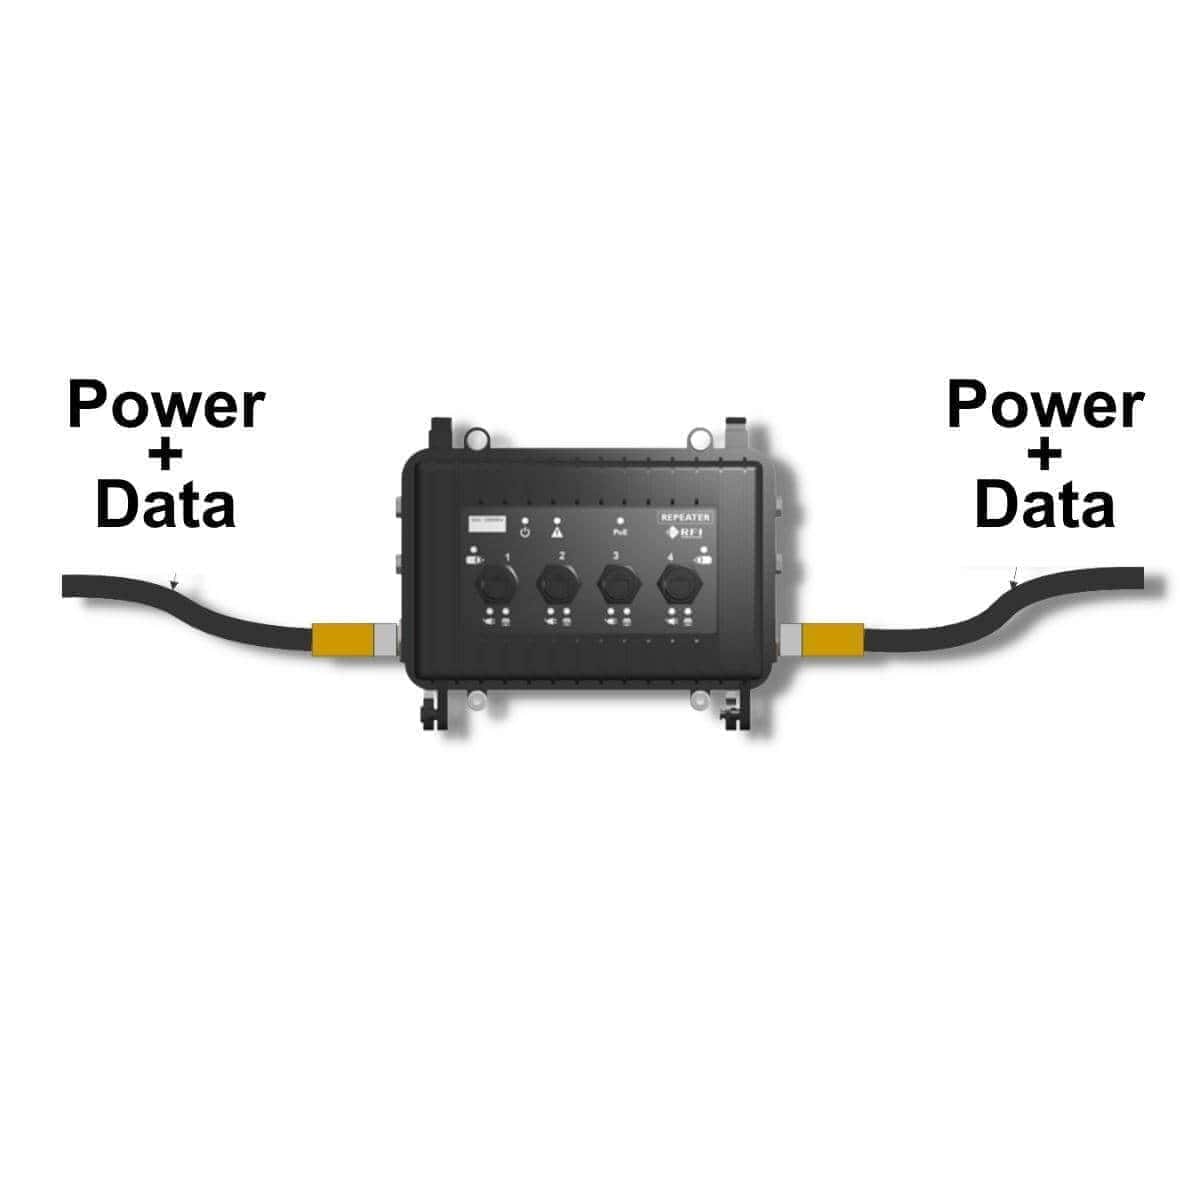 Combines Power and Data